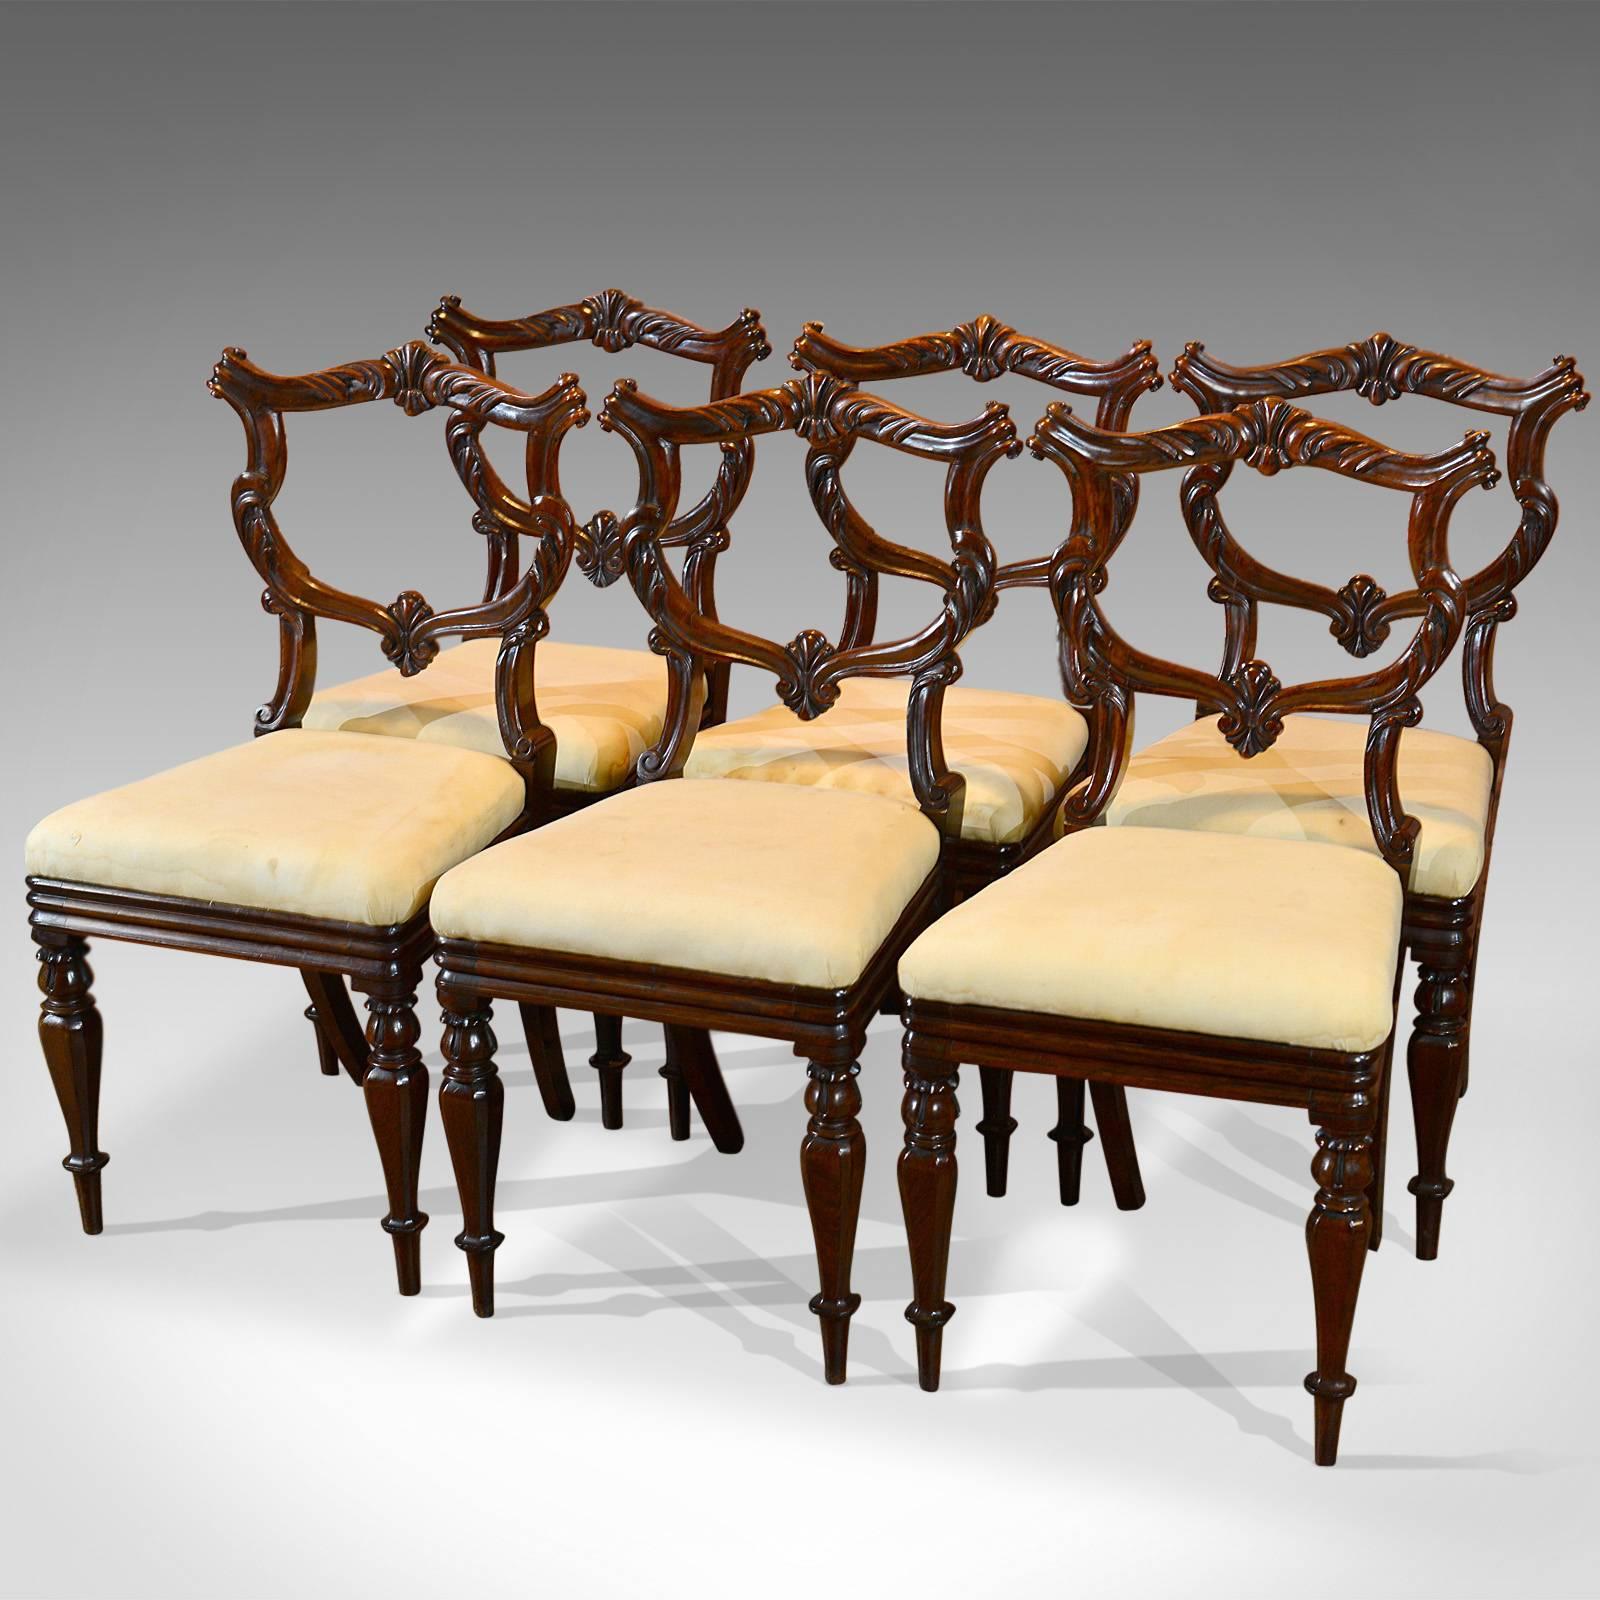 This is an antique set of six, English, superb quality dining chairs in rosewood from the reign of William IV, circa 1835.
 
In excellent antique condition, this well executed design displays superb craftsmanship in a quality, well figured